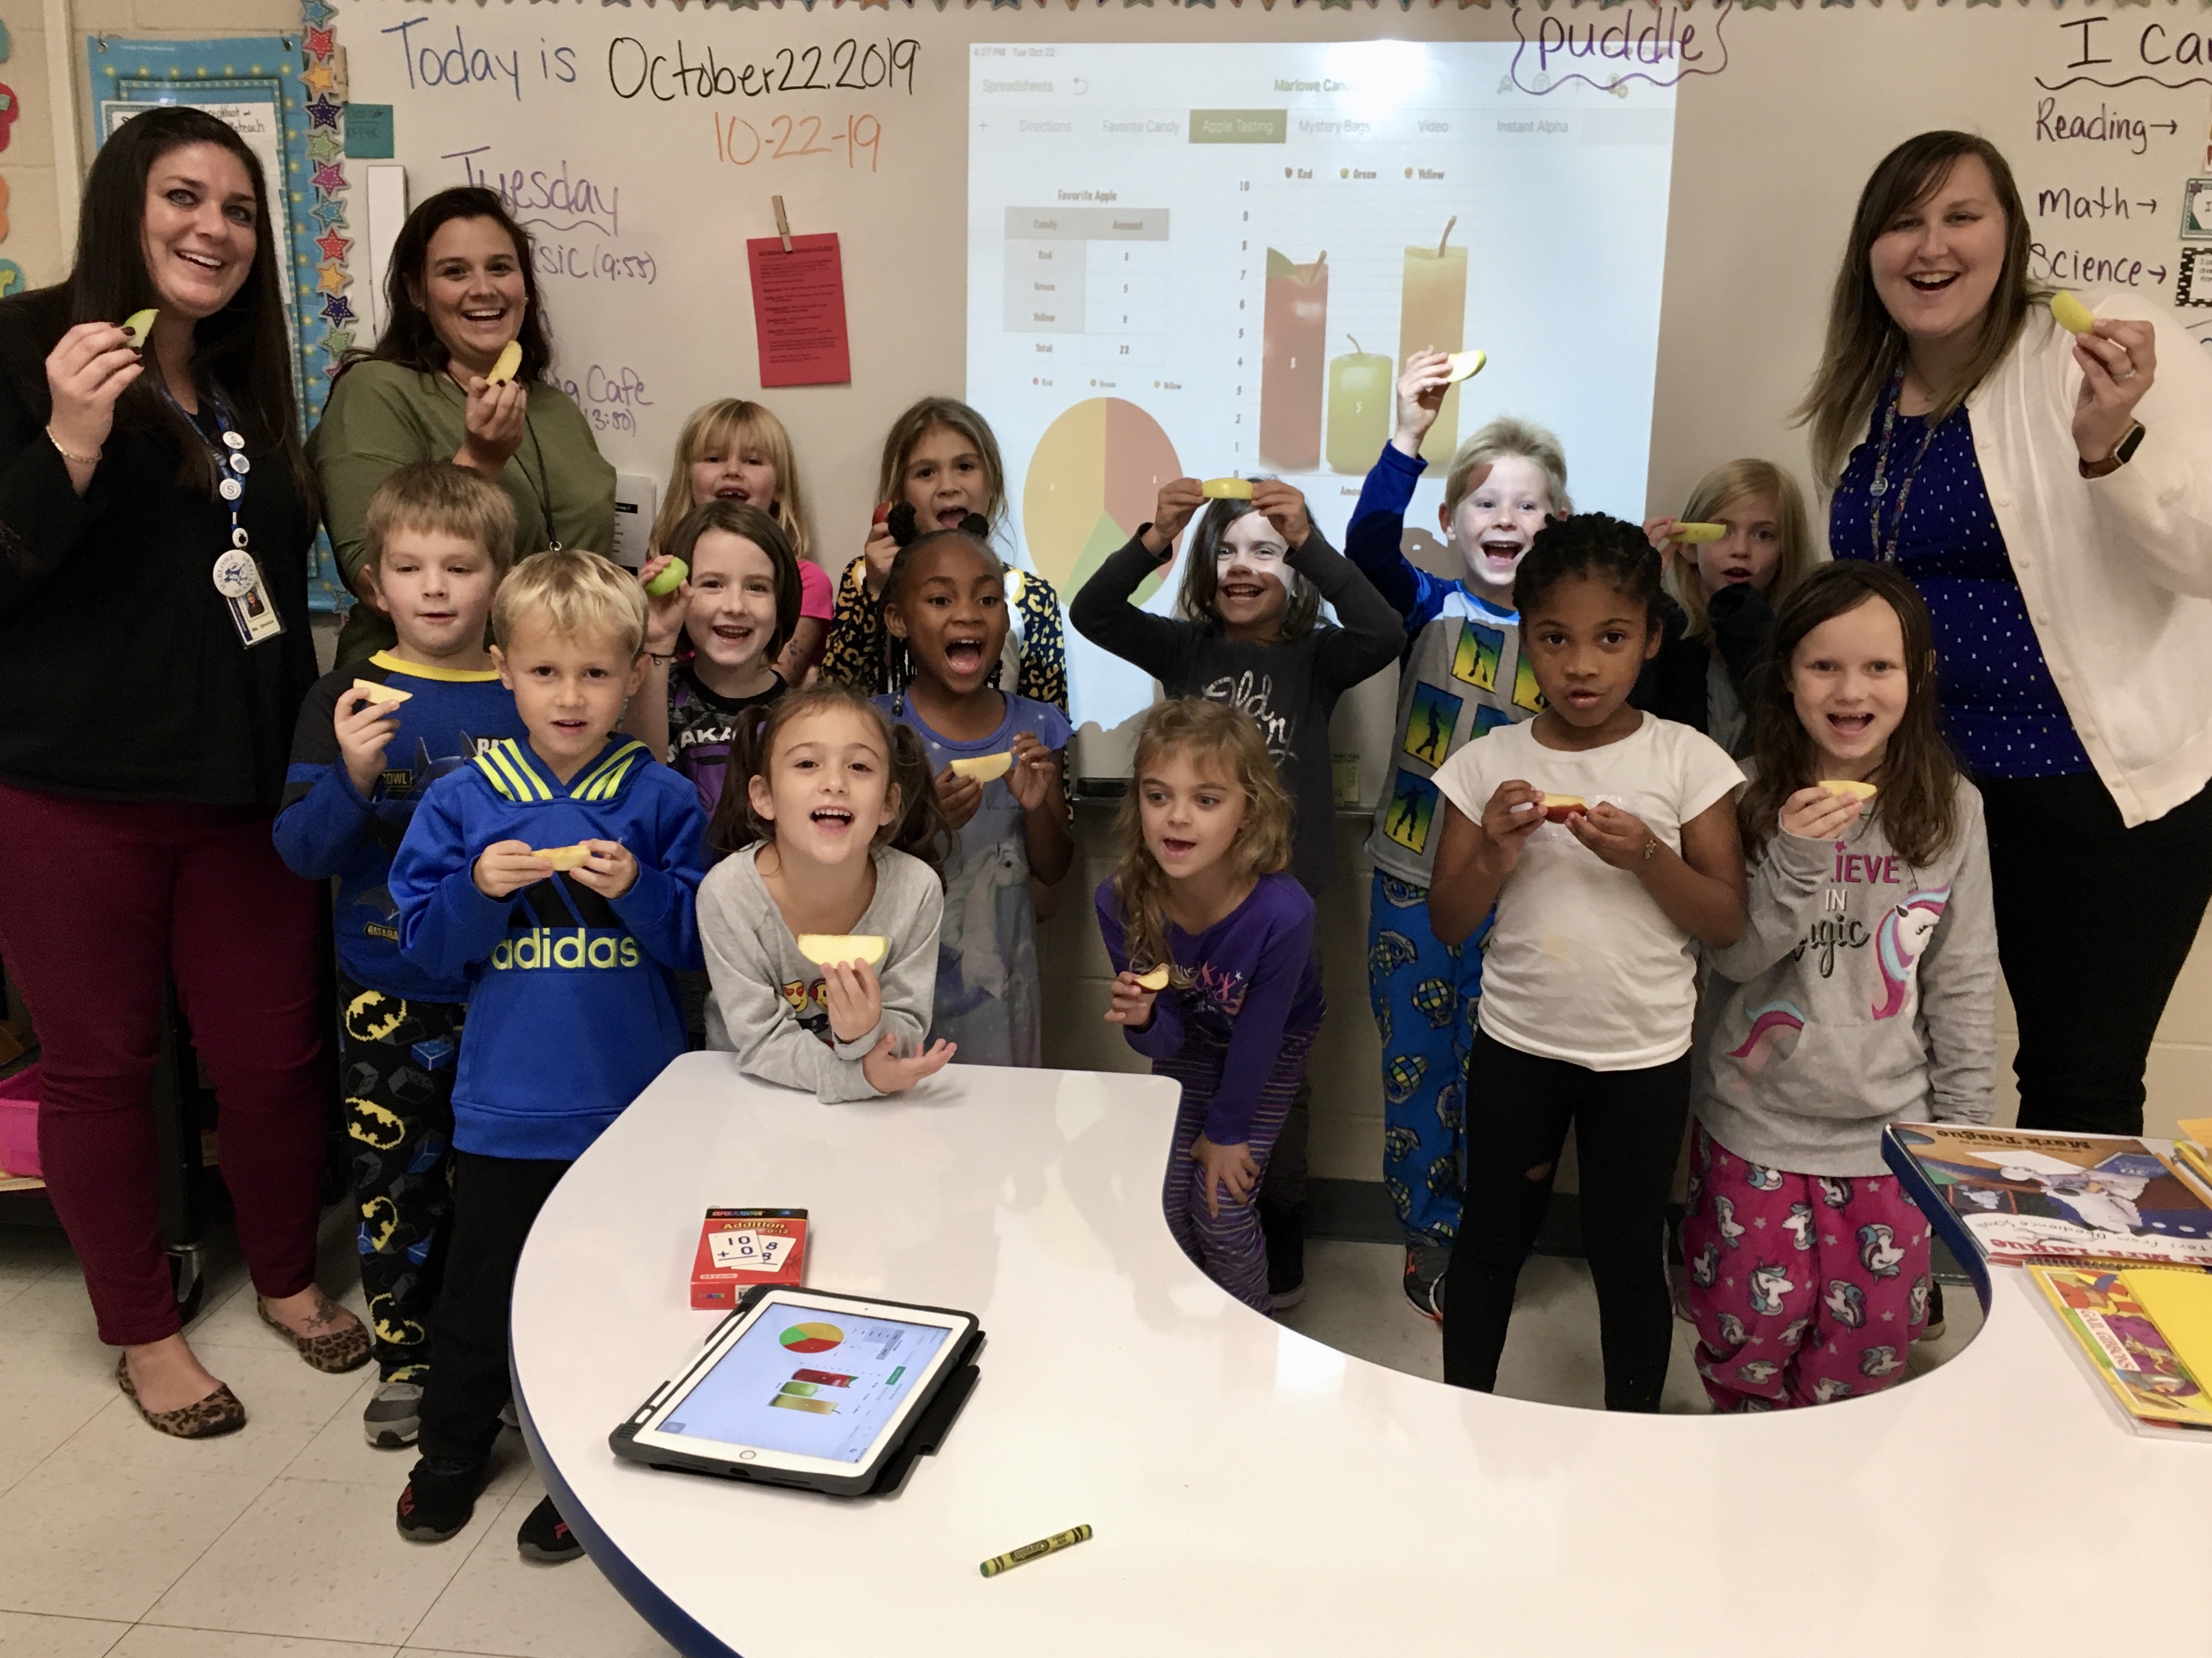 Teachers pose with a group of students smiling. They are all holding an apple slide. You can see an apple graph in the background.